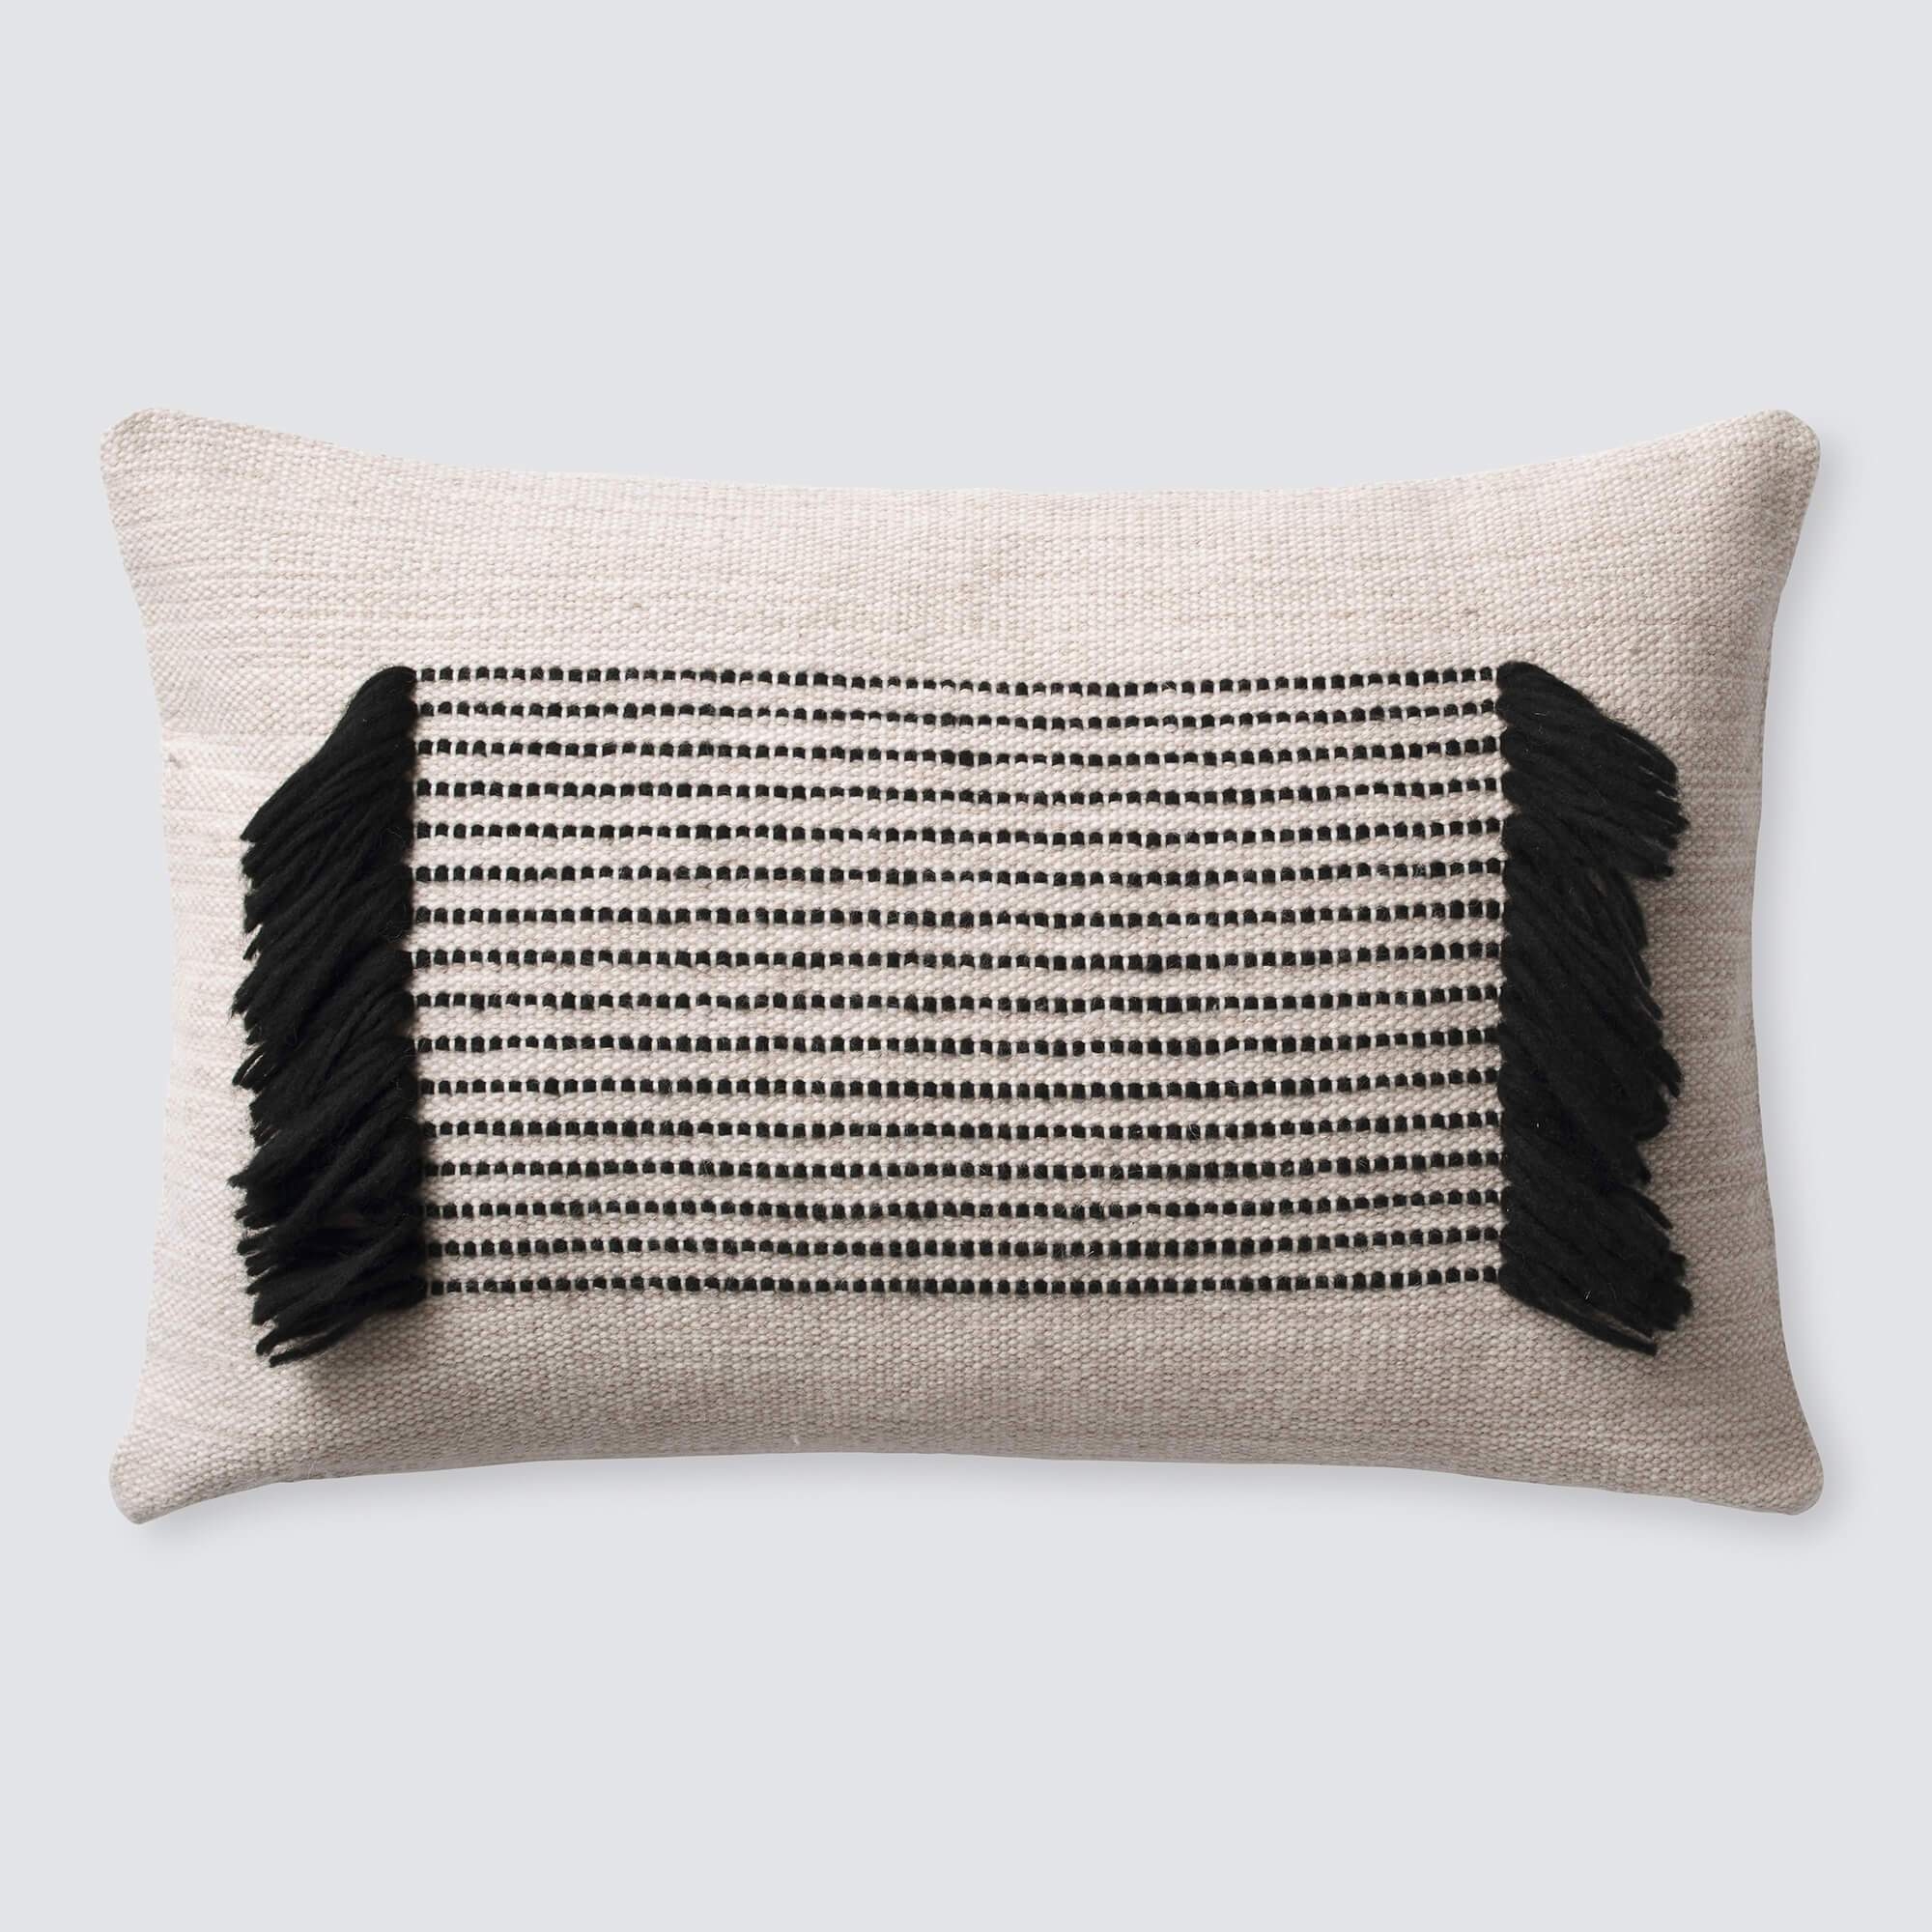 Adora Lumbar Pillow By The Citizenry - Image 0